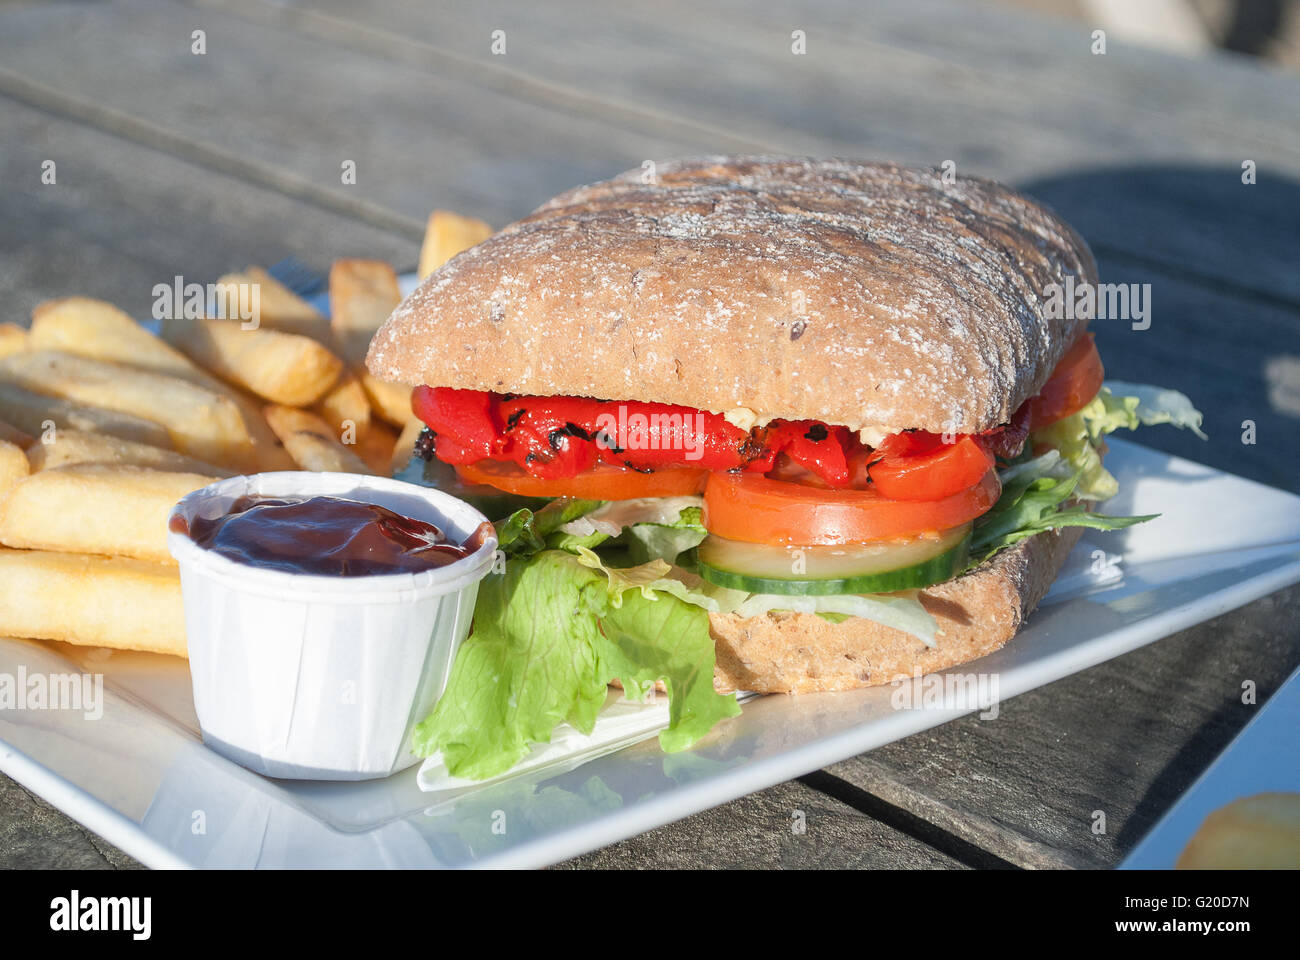 Vegan Roasted Pepper and Mixed Salad Sandwich, with chips and tomato sauce. Stock Photo